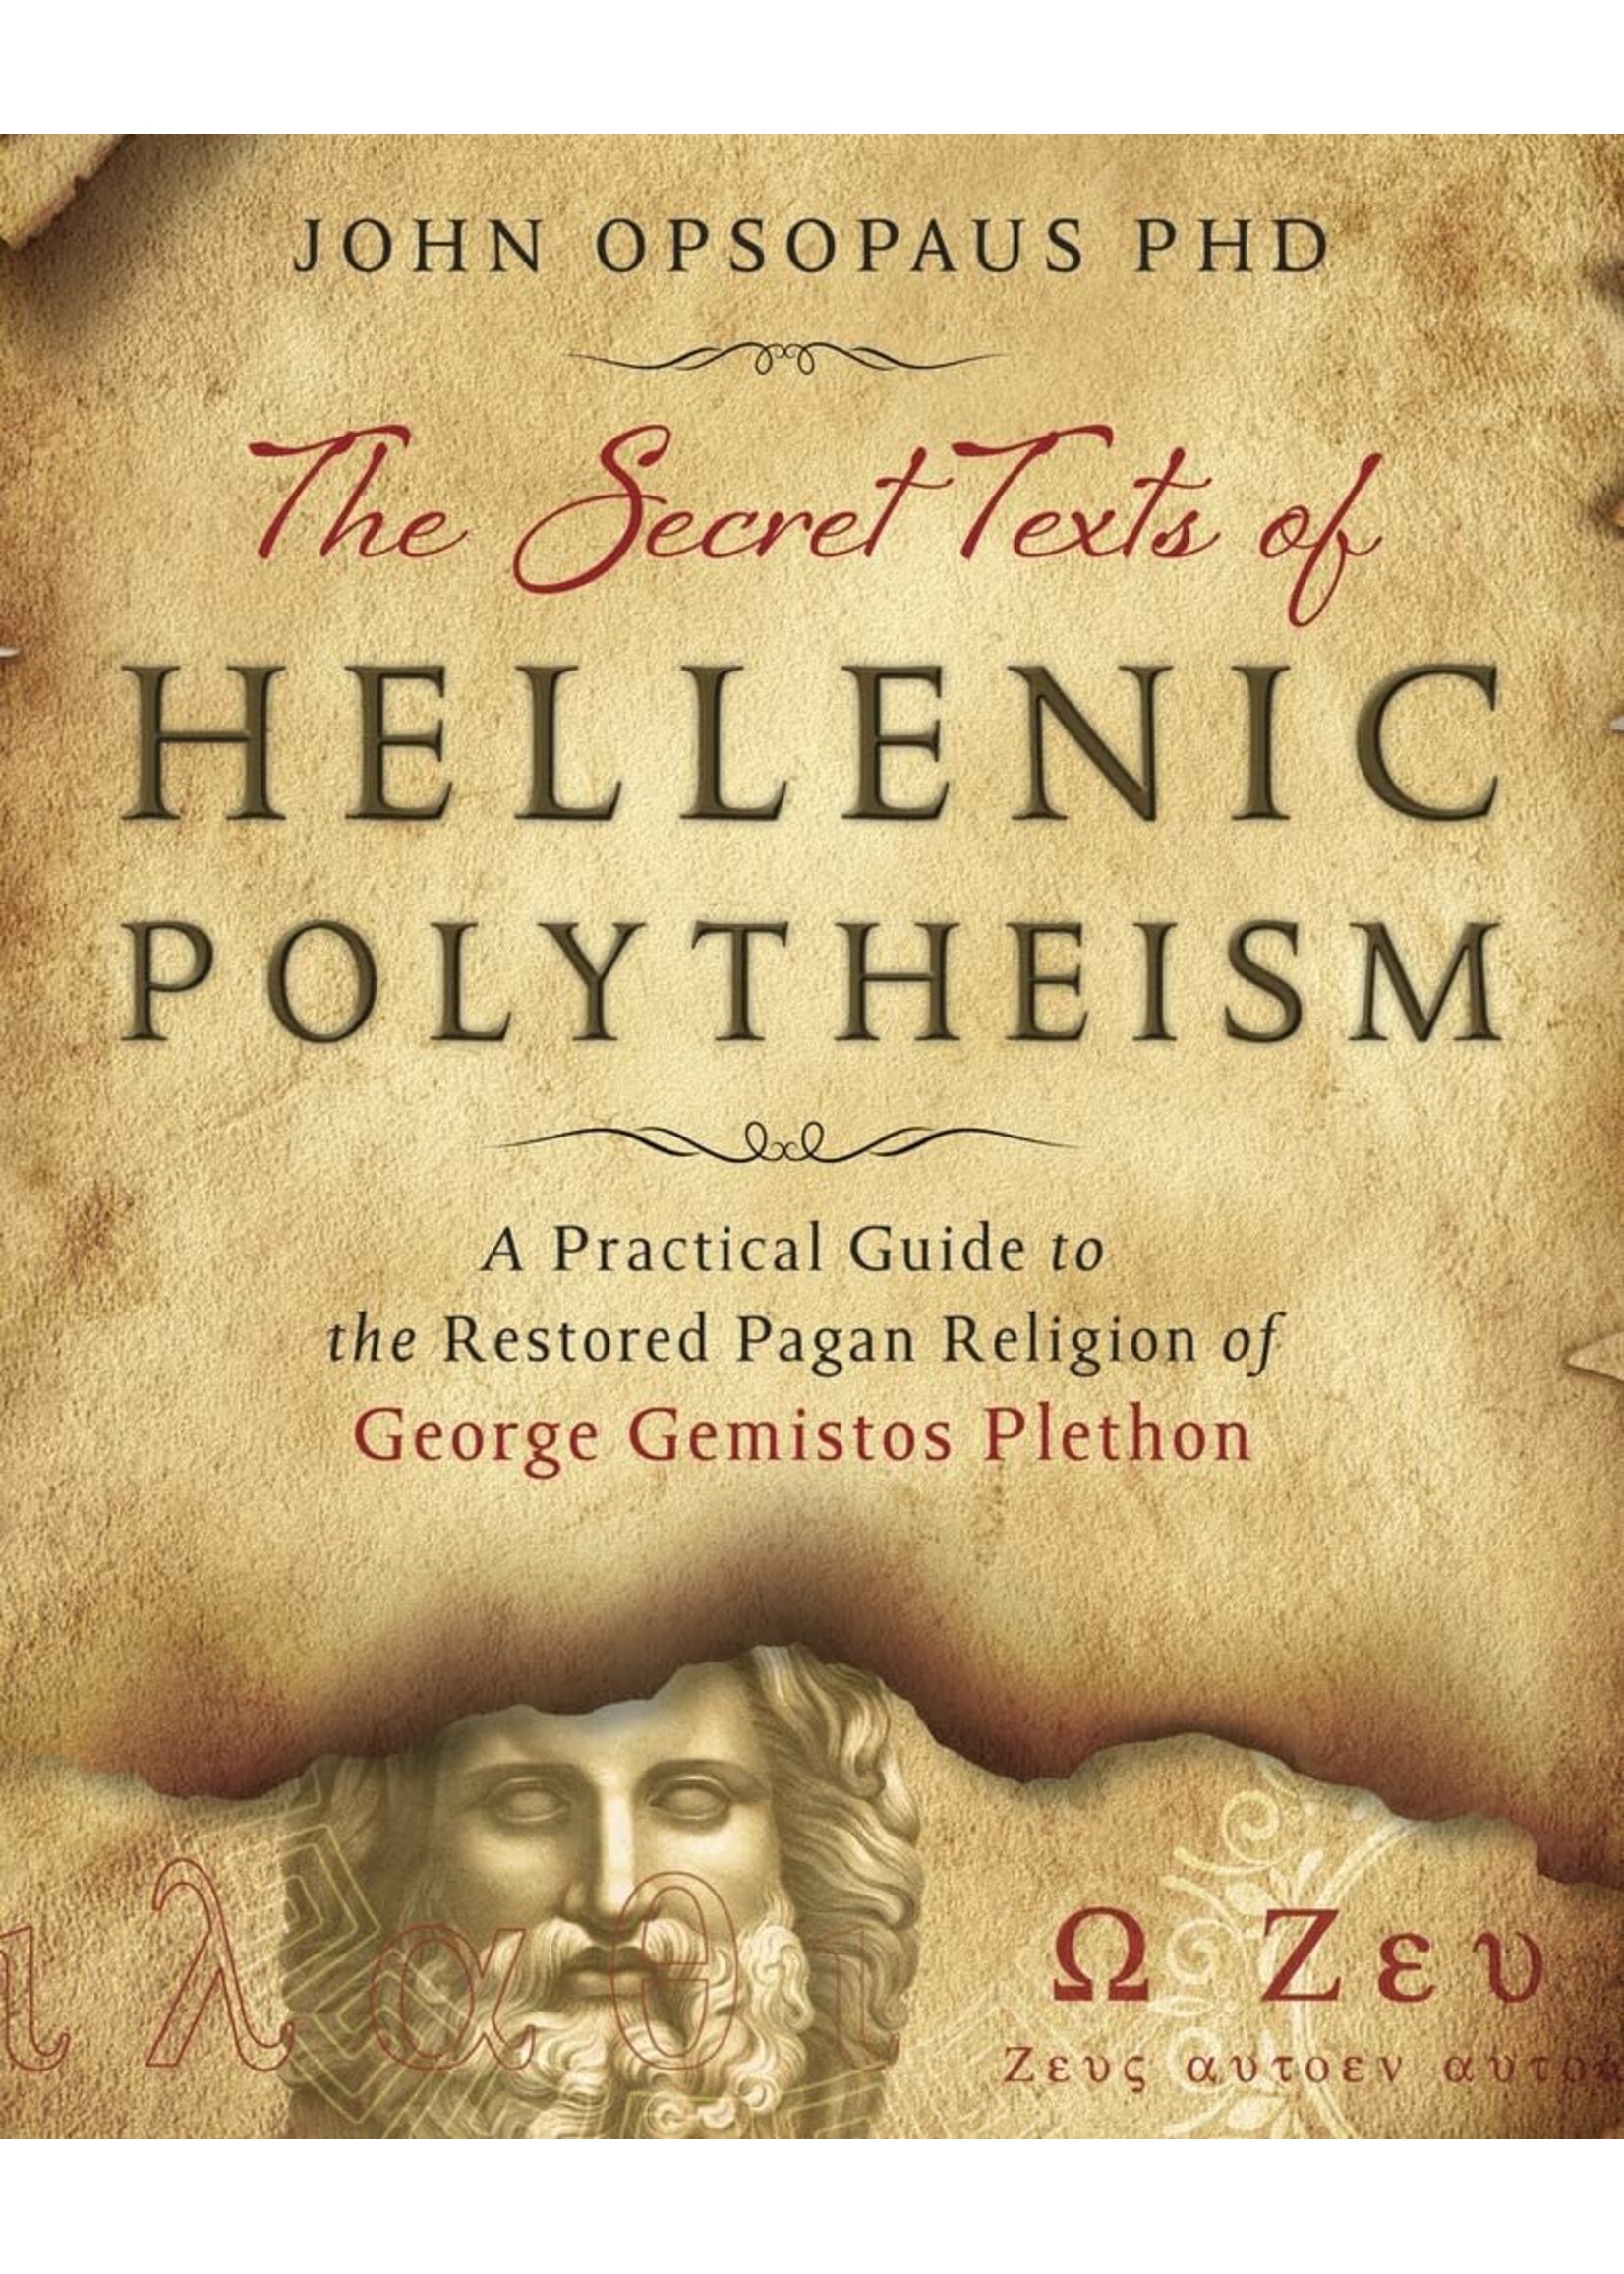 The Secret Texts of Hellenic Polytheism by Opsopaus